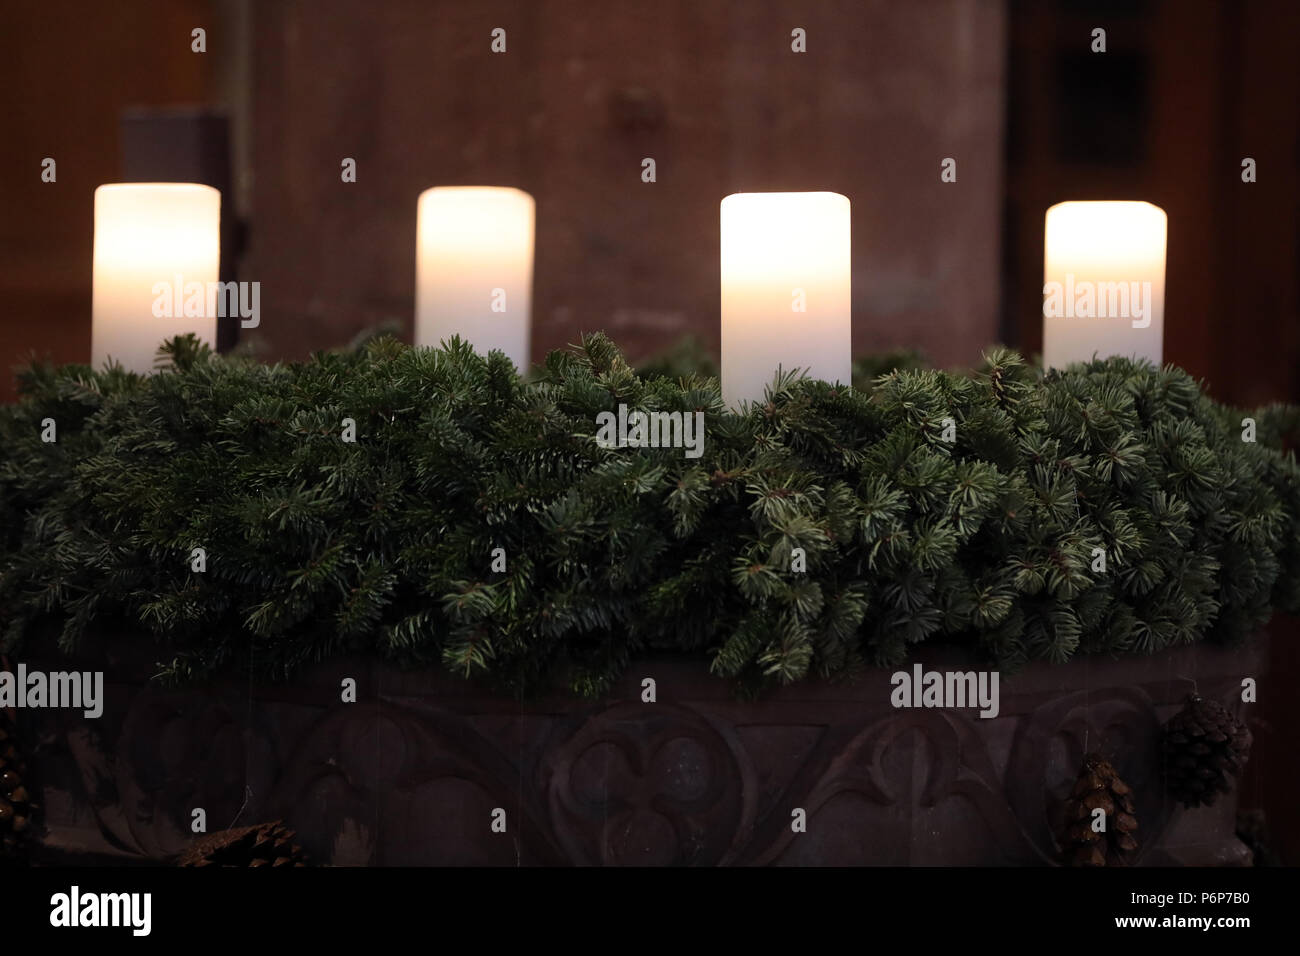 Theodorskirche.  Advent wreath with 4 white candles.  Basel. Switzerland. Stock Photo